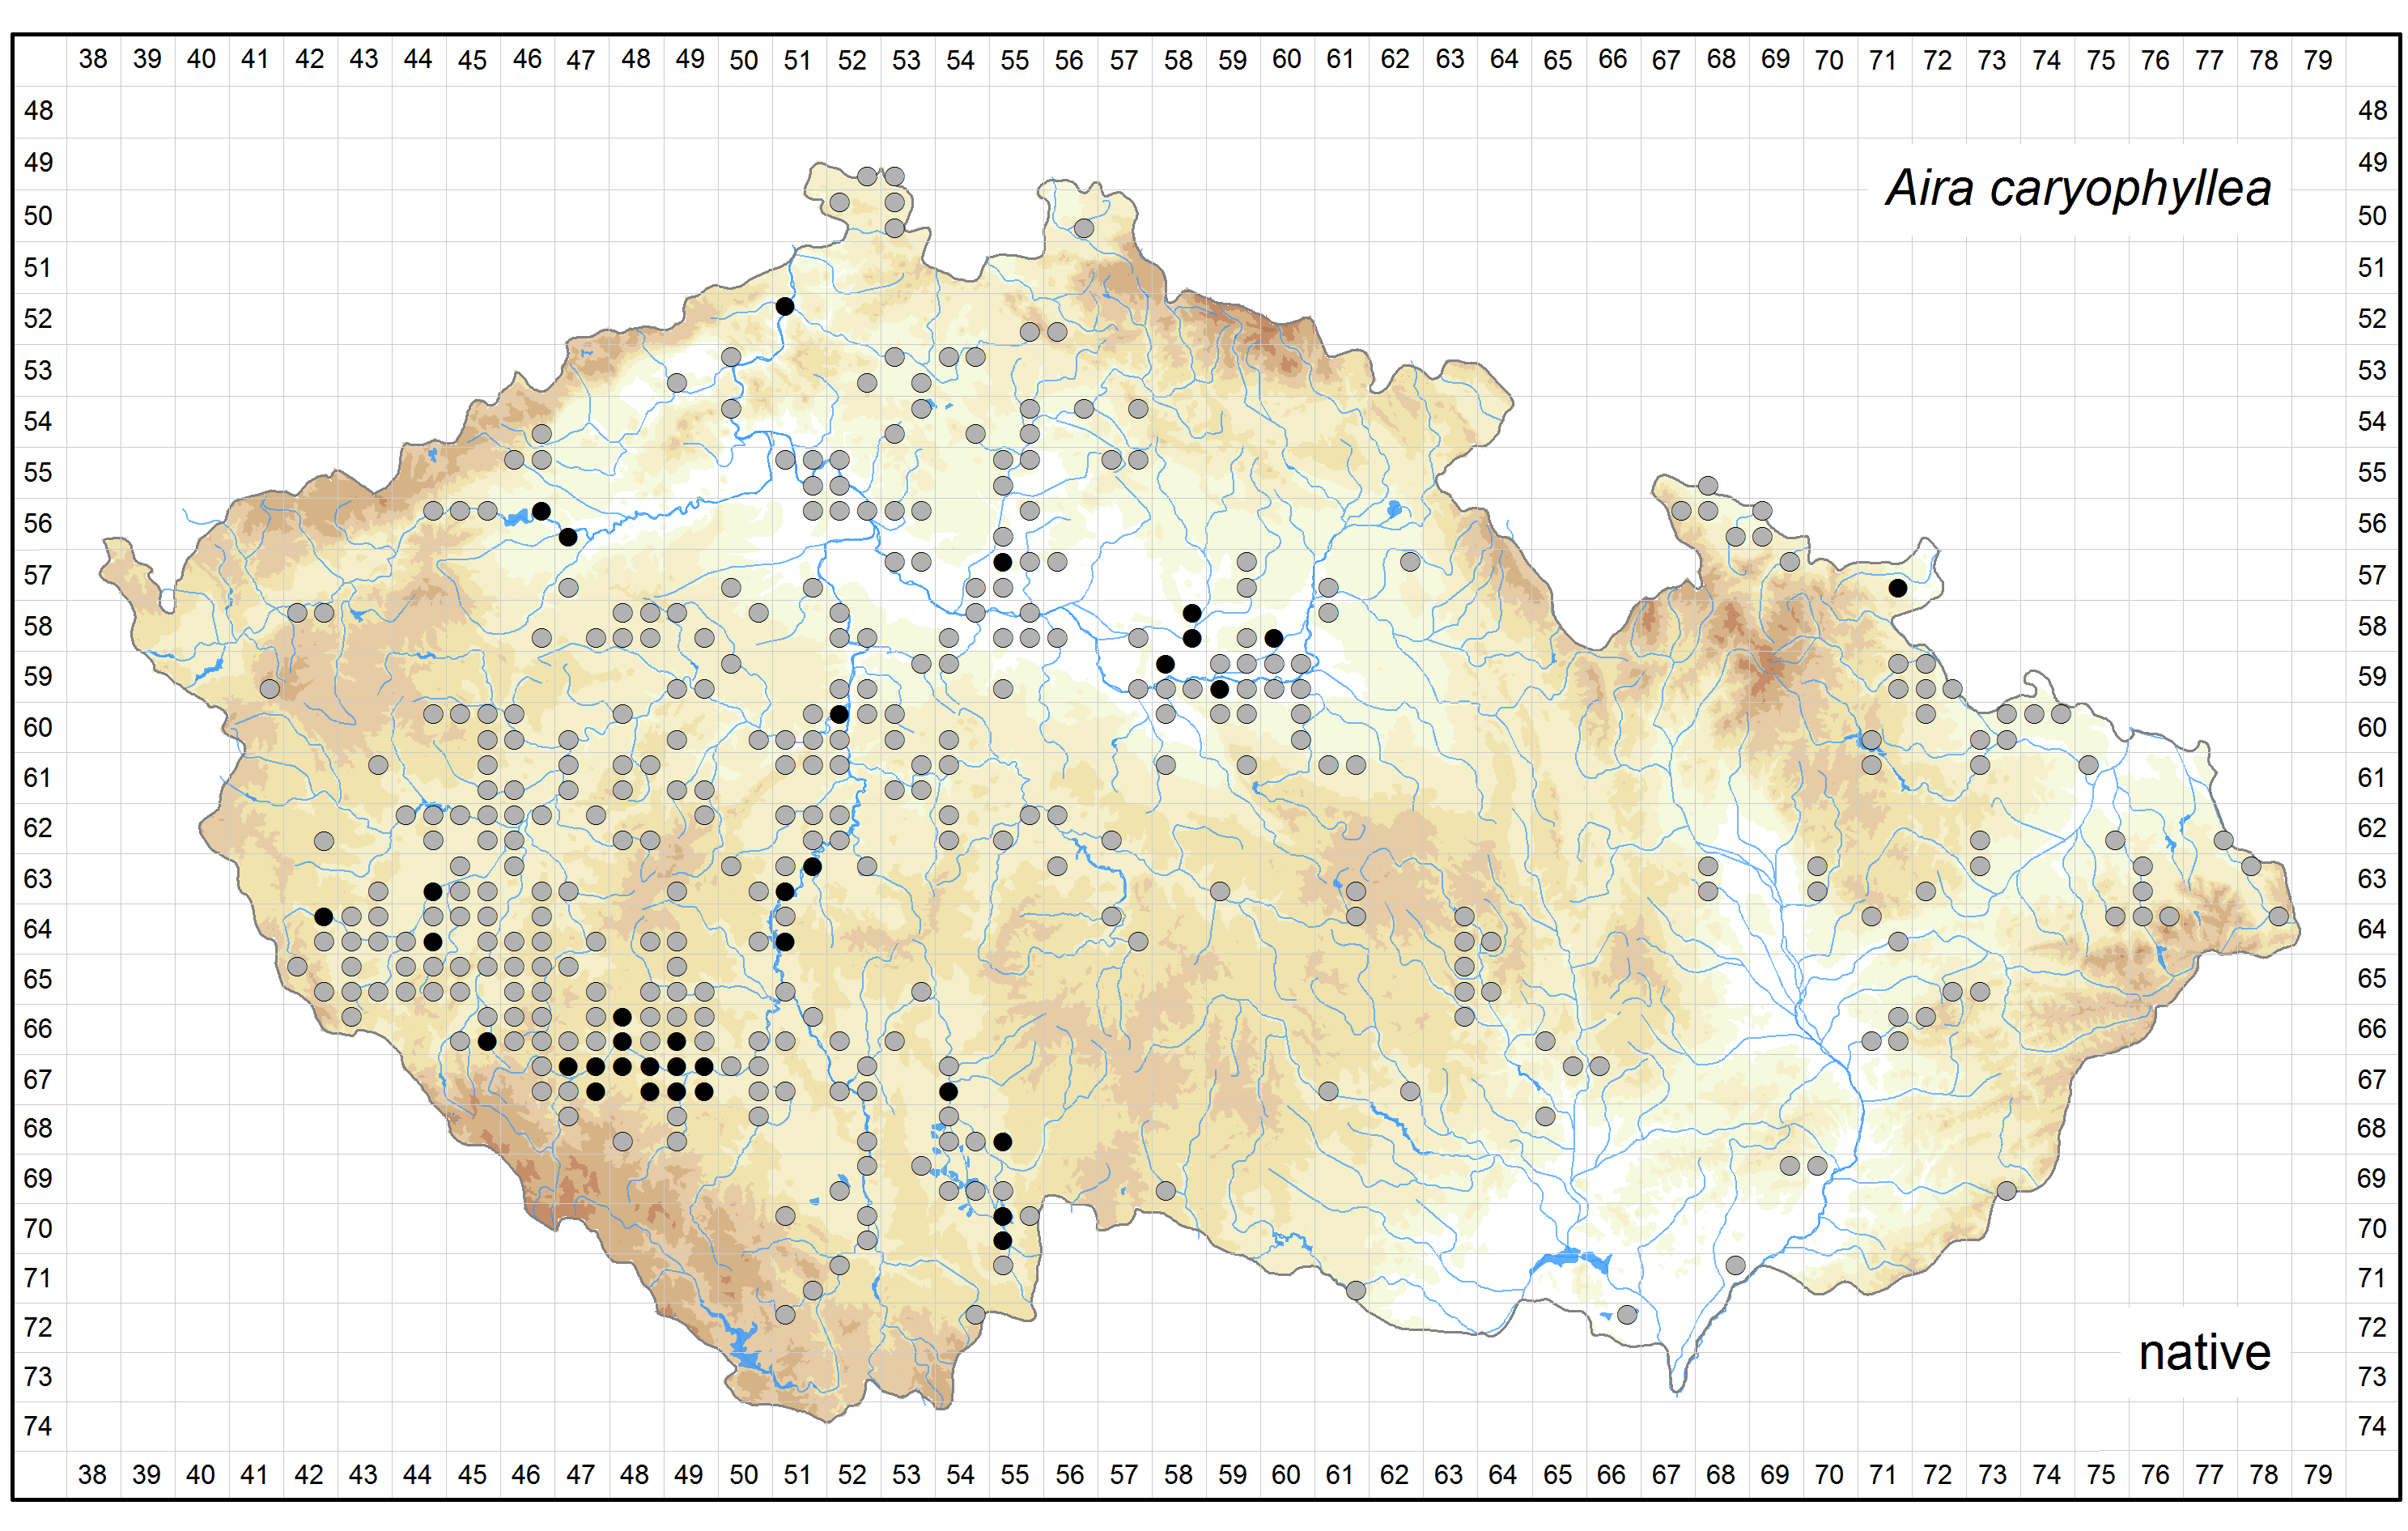 Distribution of Aira caryophyllea in the Czech Republic Author of the map: Zdenek Kaplan Map produced on: 18-11-2015 Database records used for producing the distribution map of Aira caryophyllea